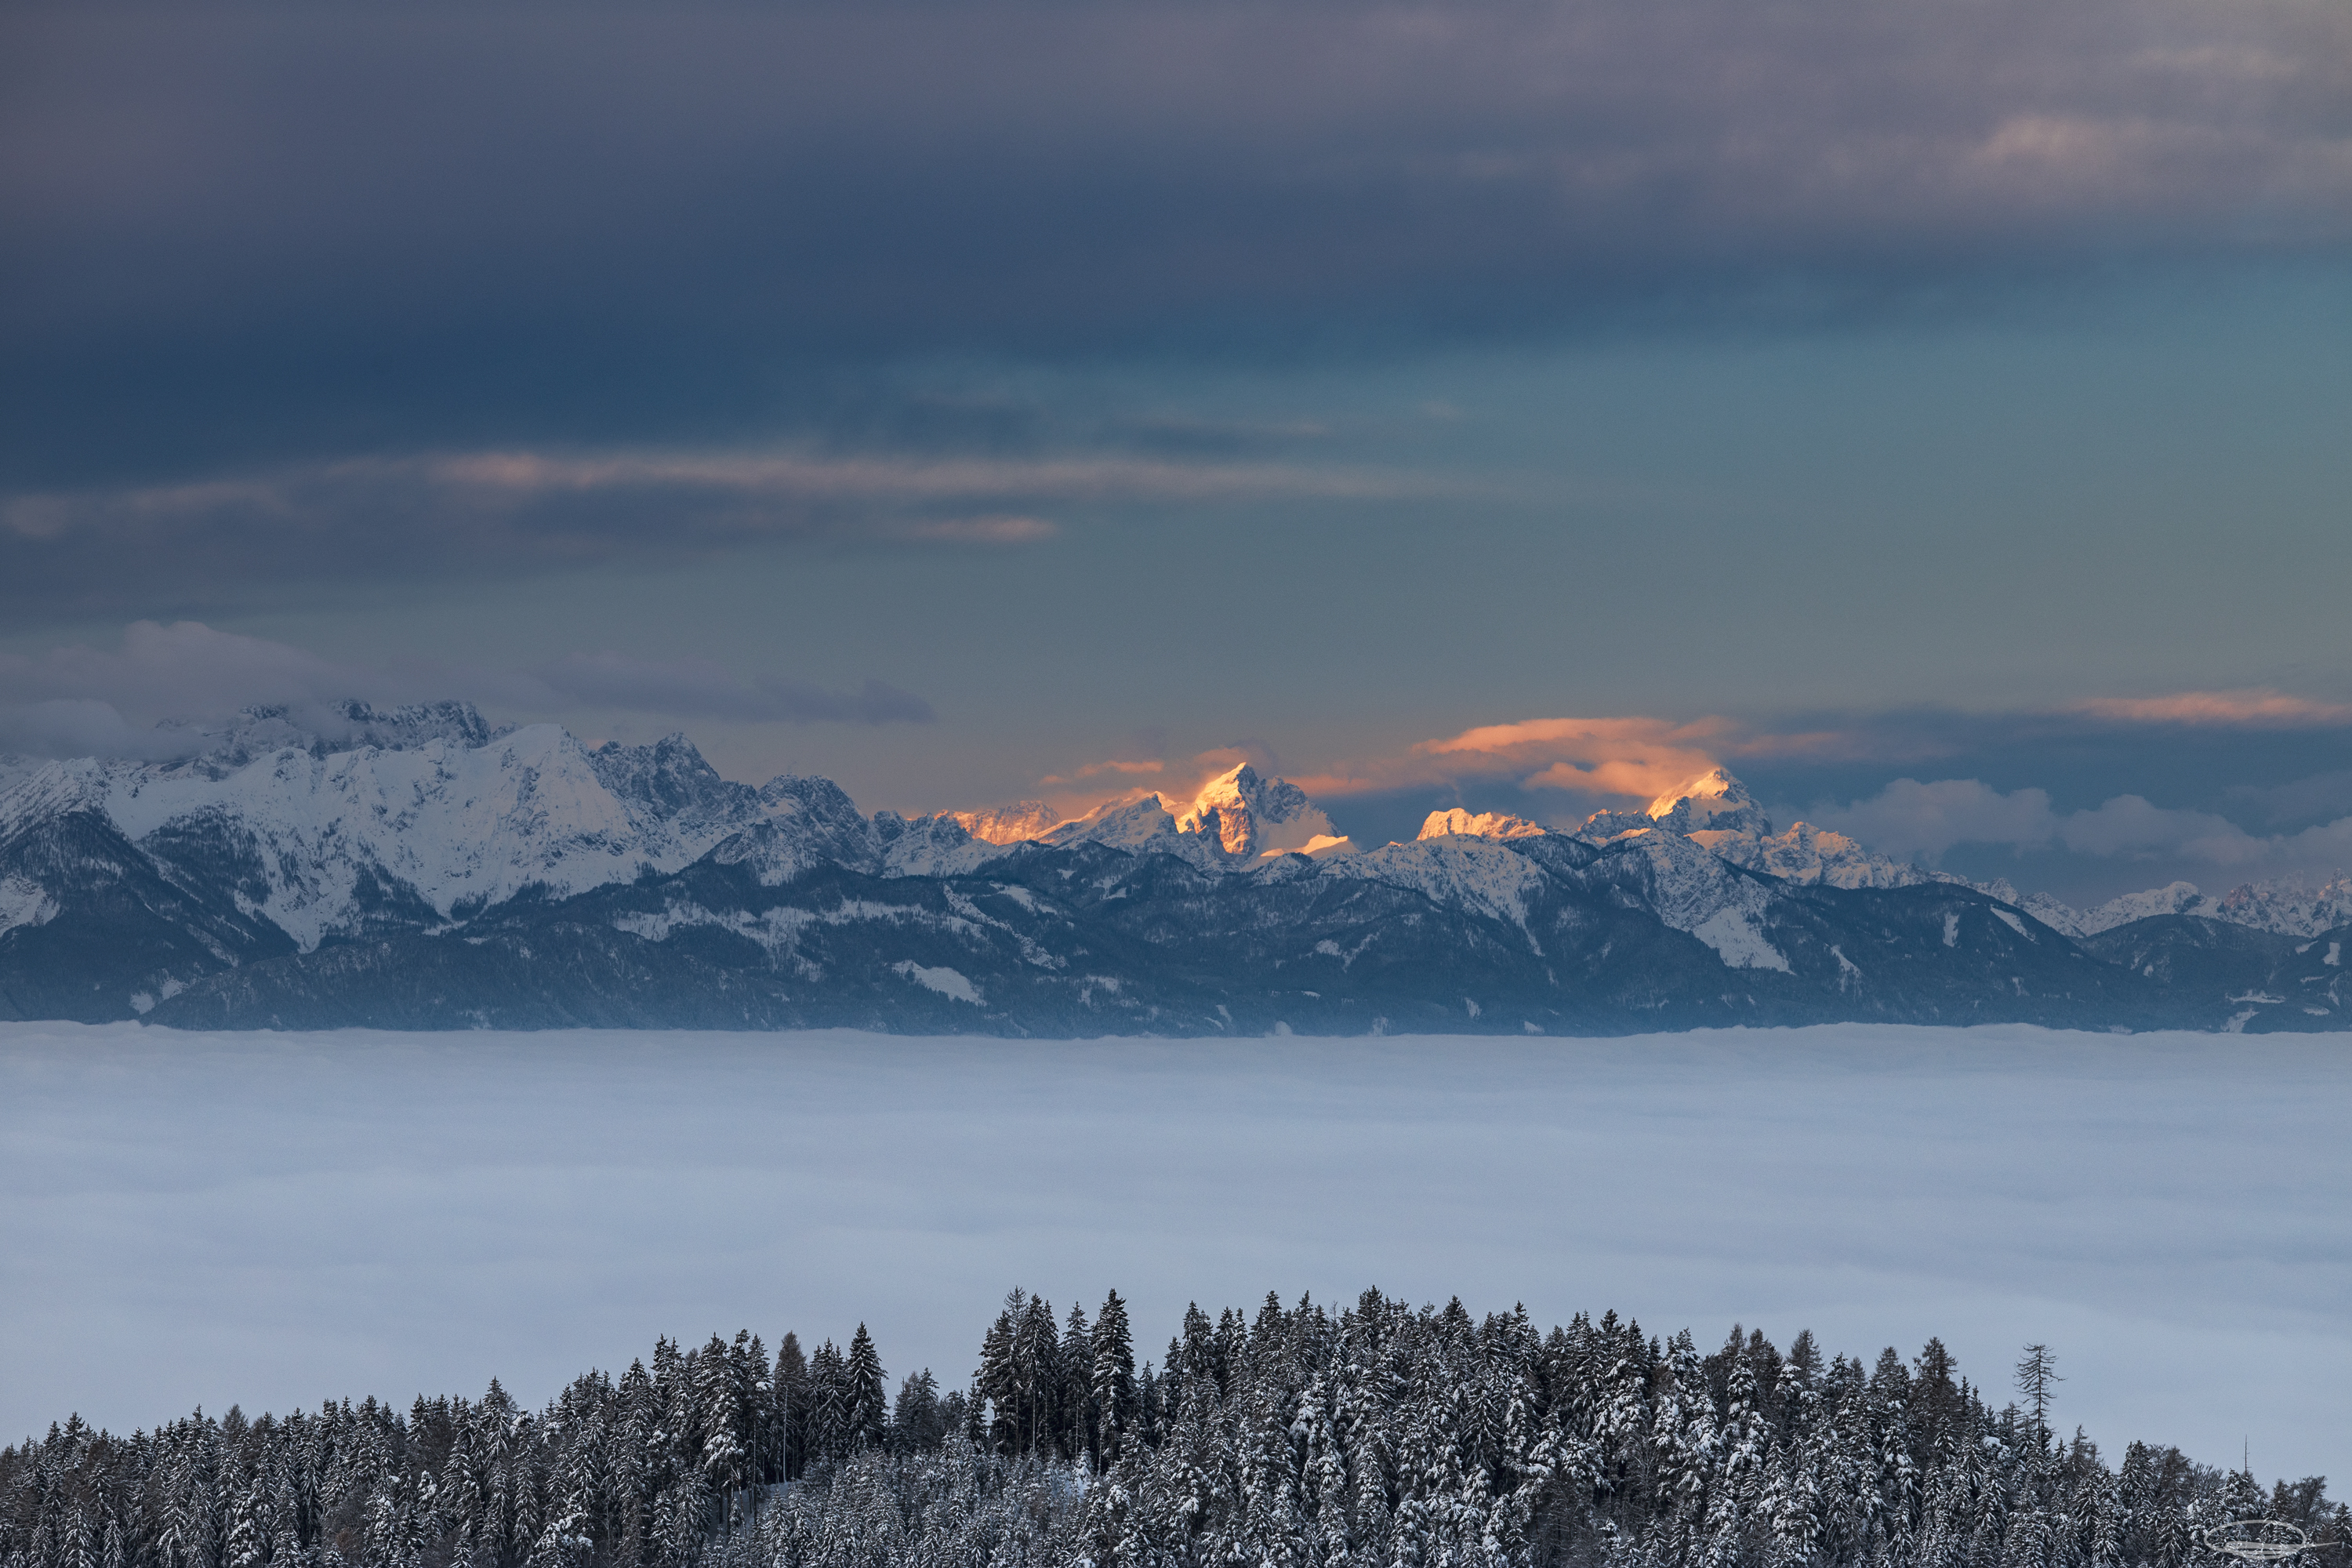 Mountain Glow over the foggy valley